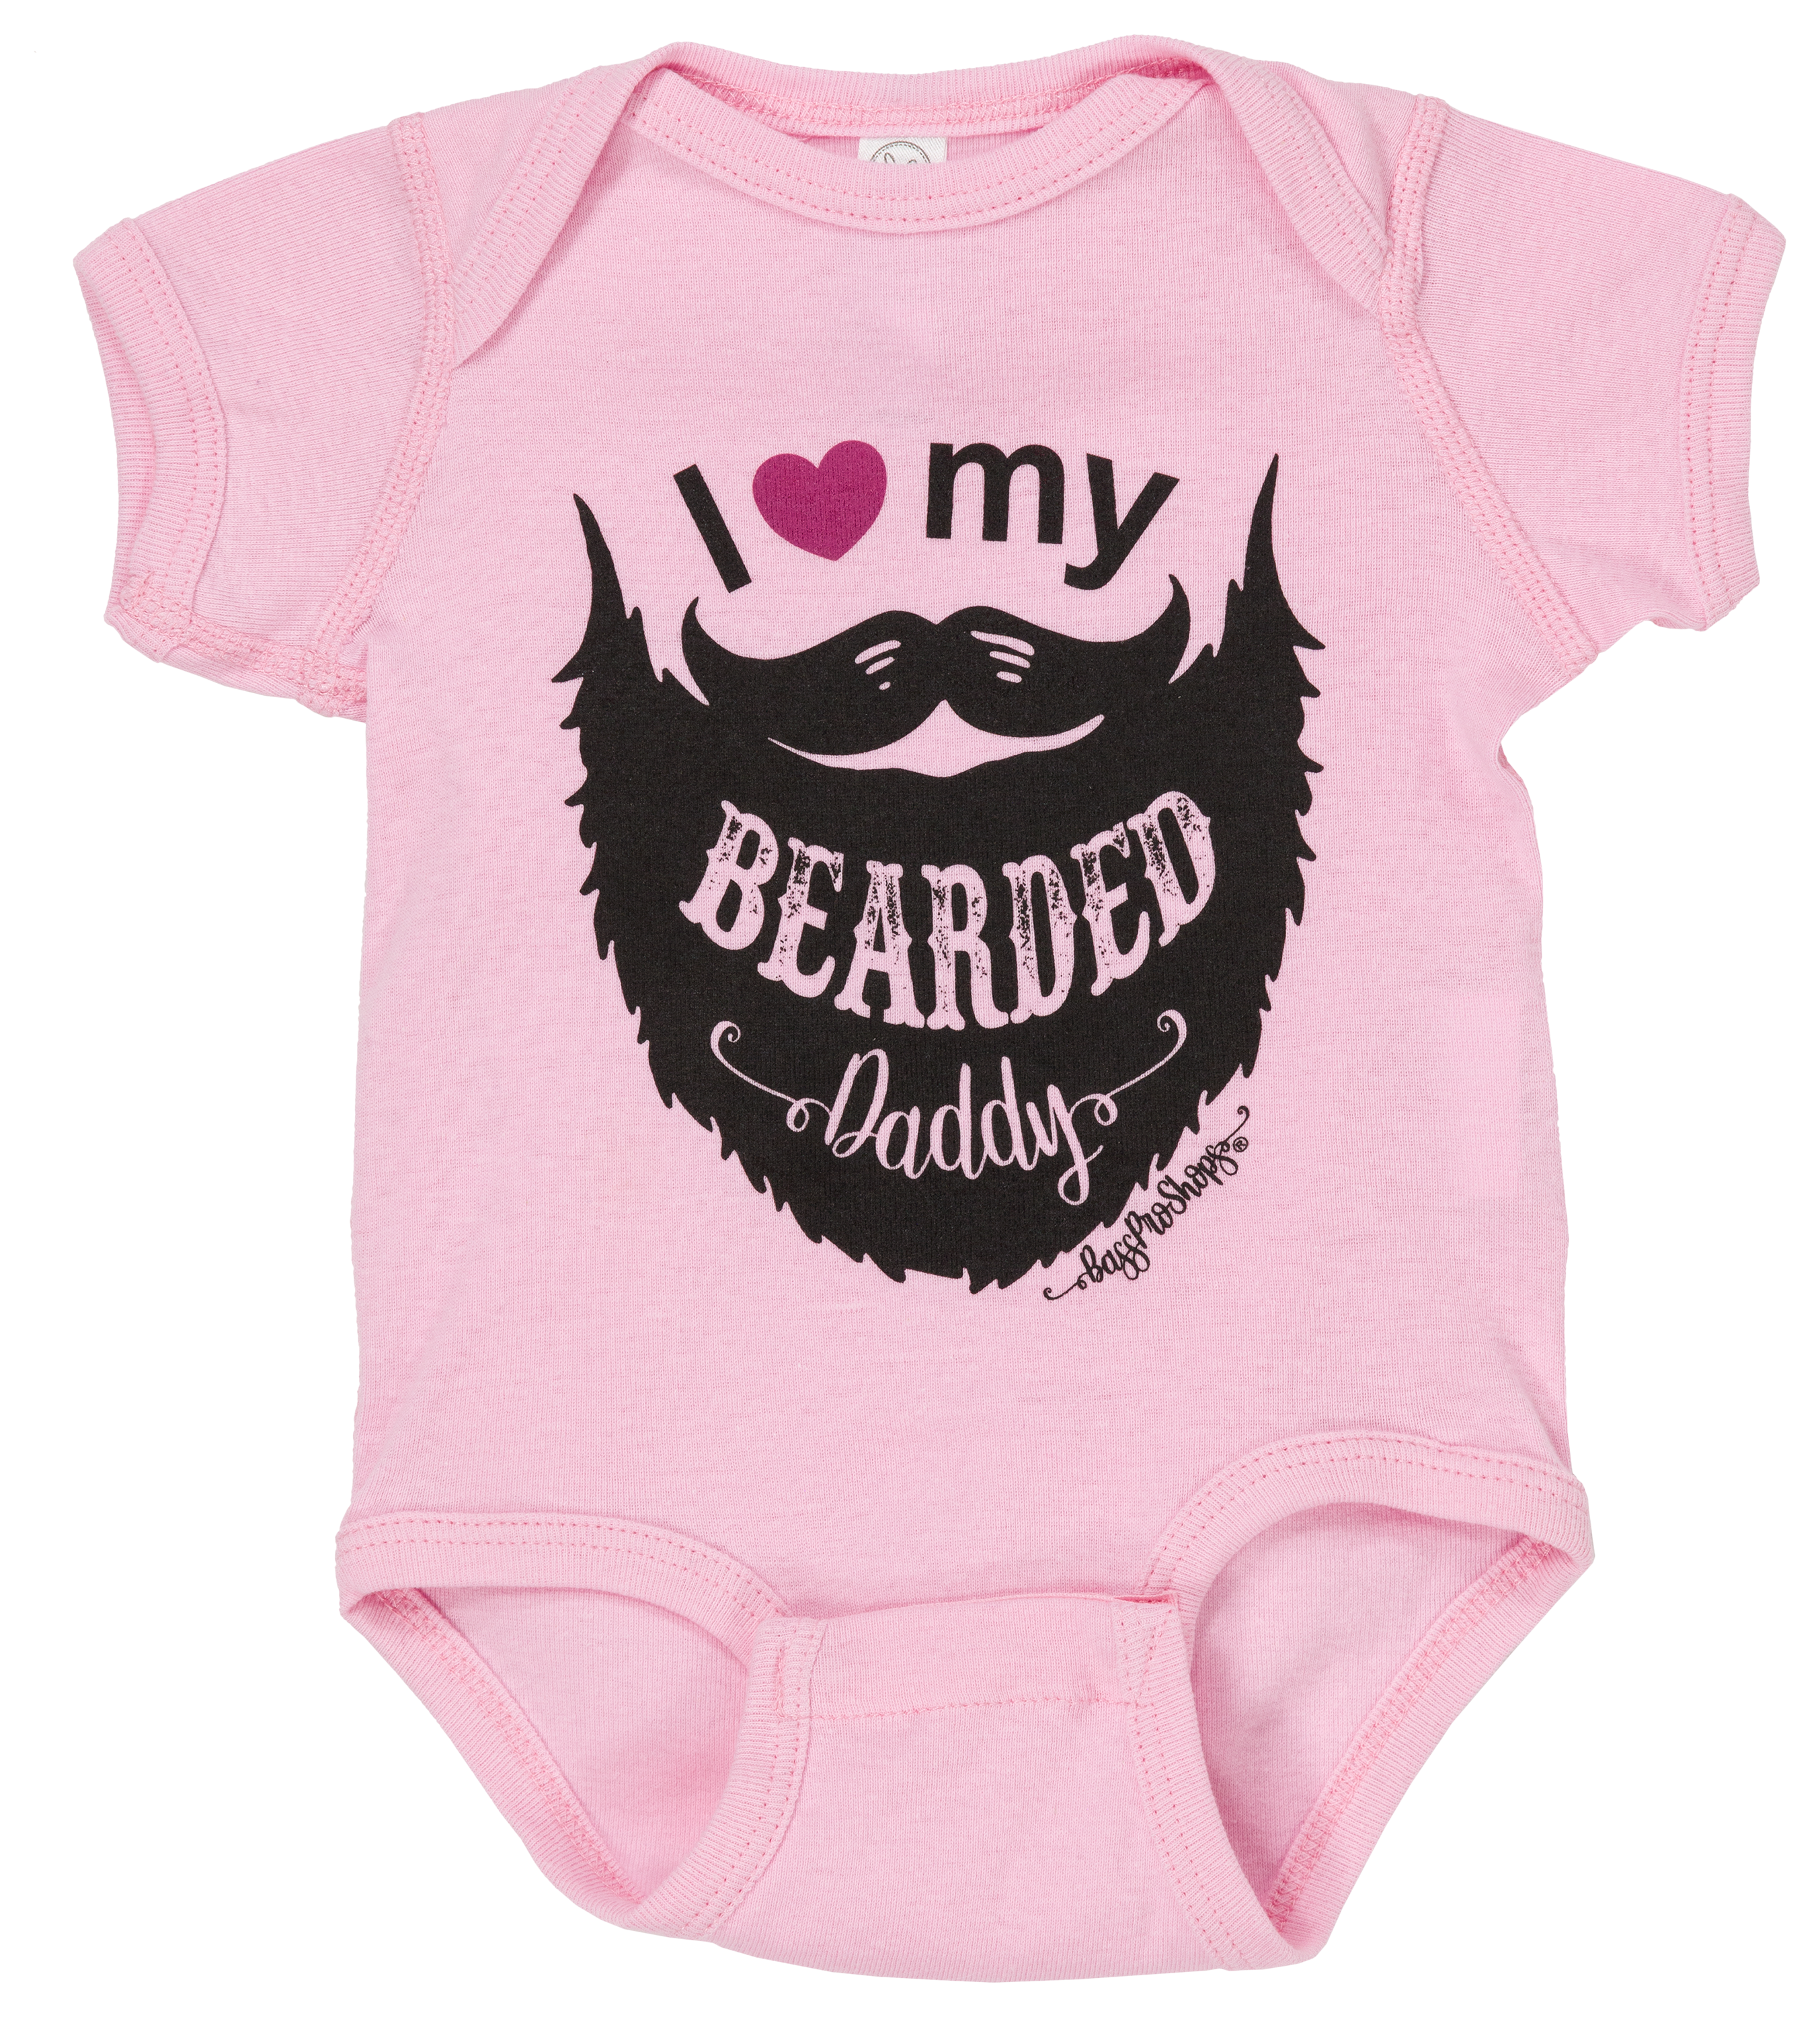 Bass Pro Shops I Heart My Bearded Daddy Short-Sleeve Bodysuit for Babies - Pink - 6 Months